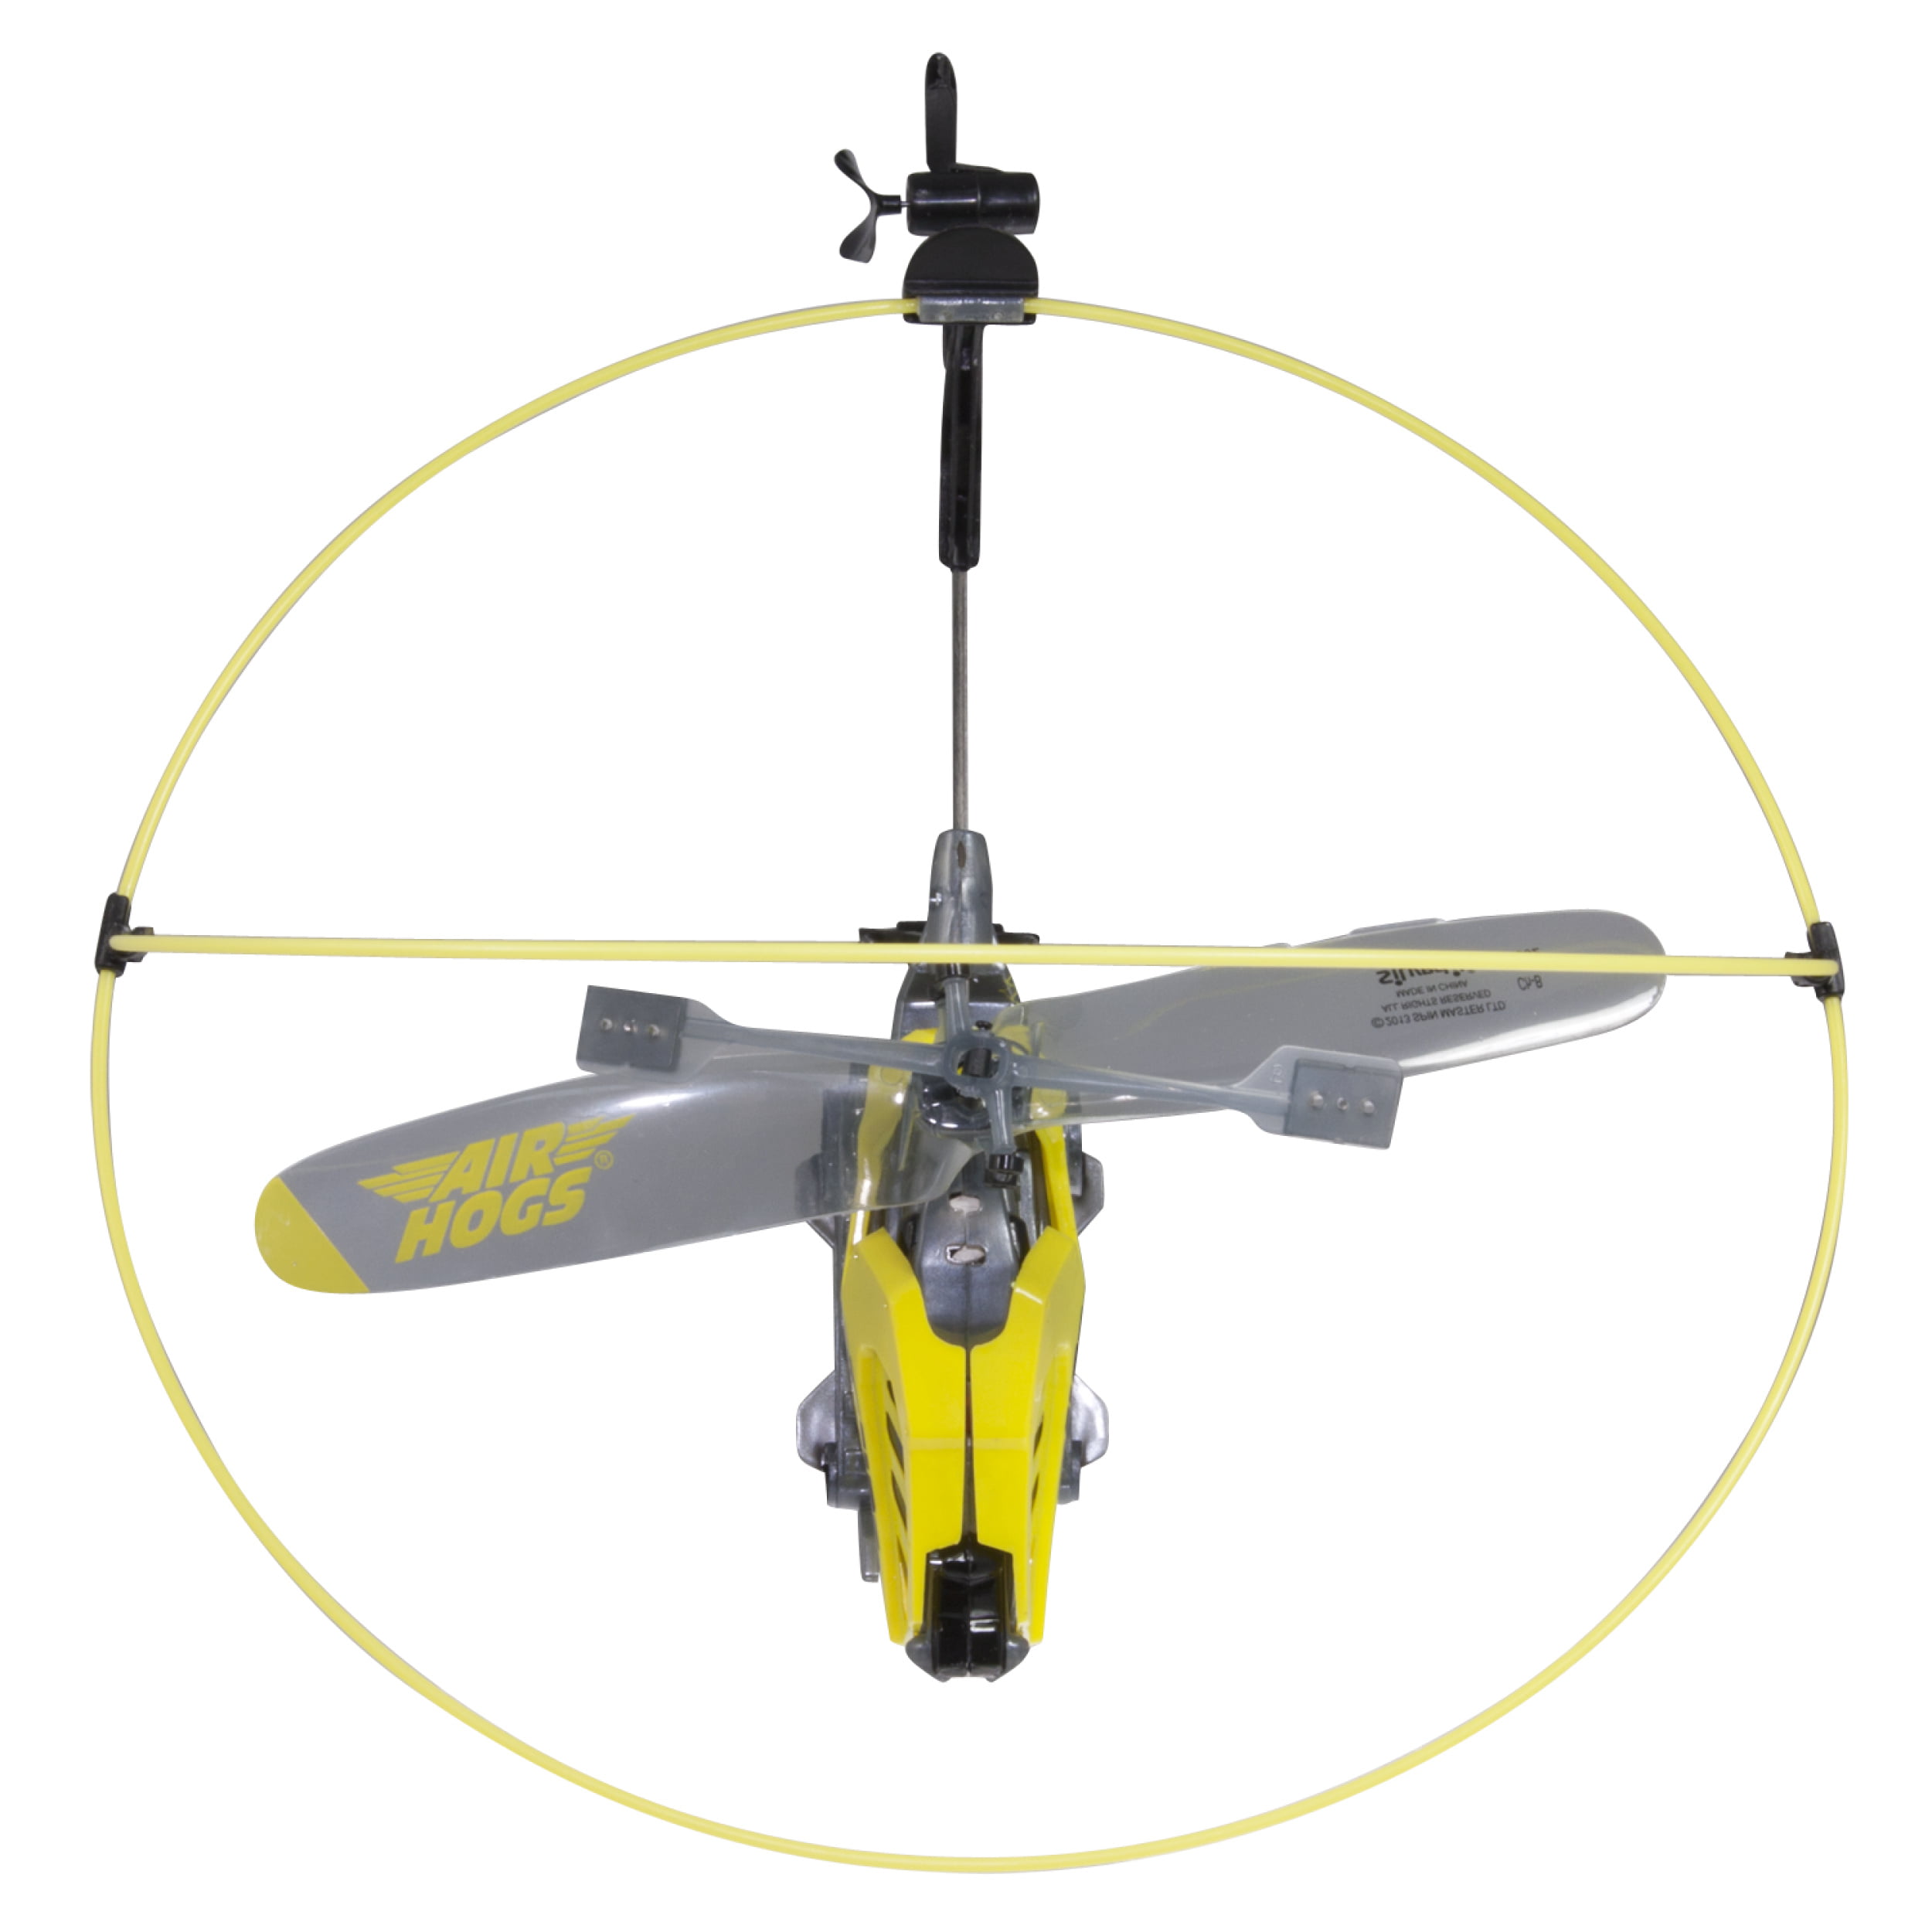 Air Hogs Heli Cage Yellow